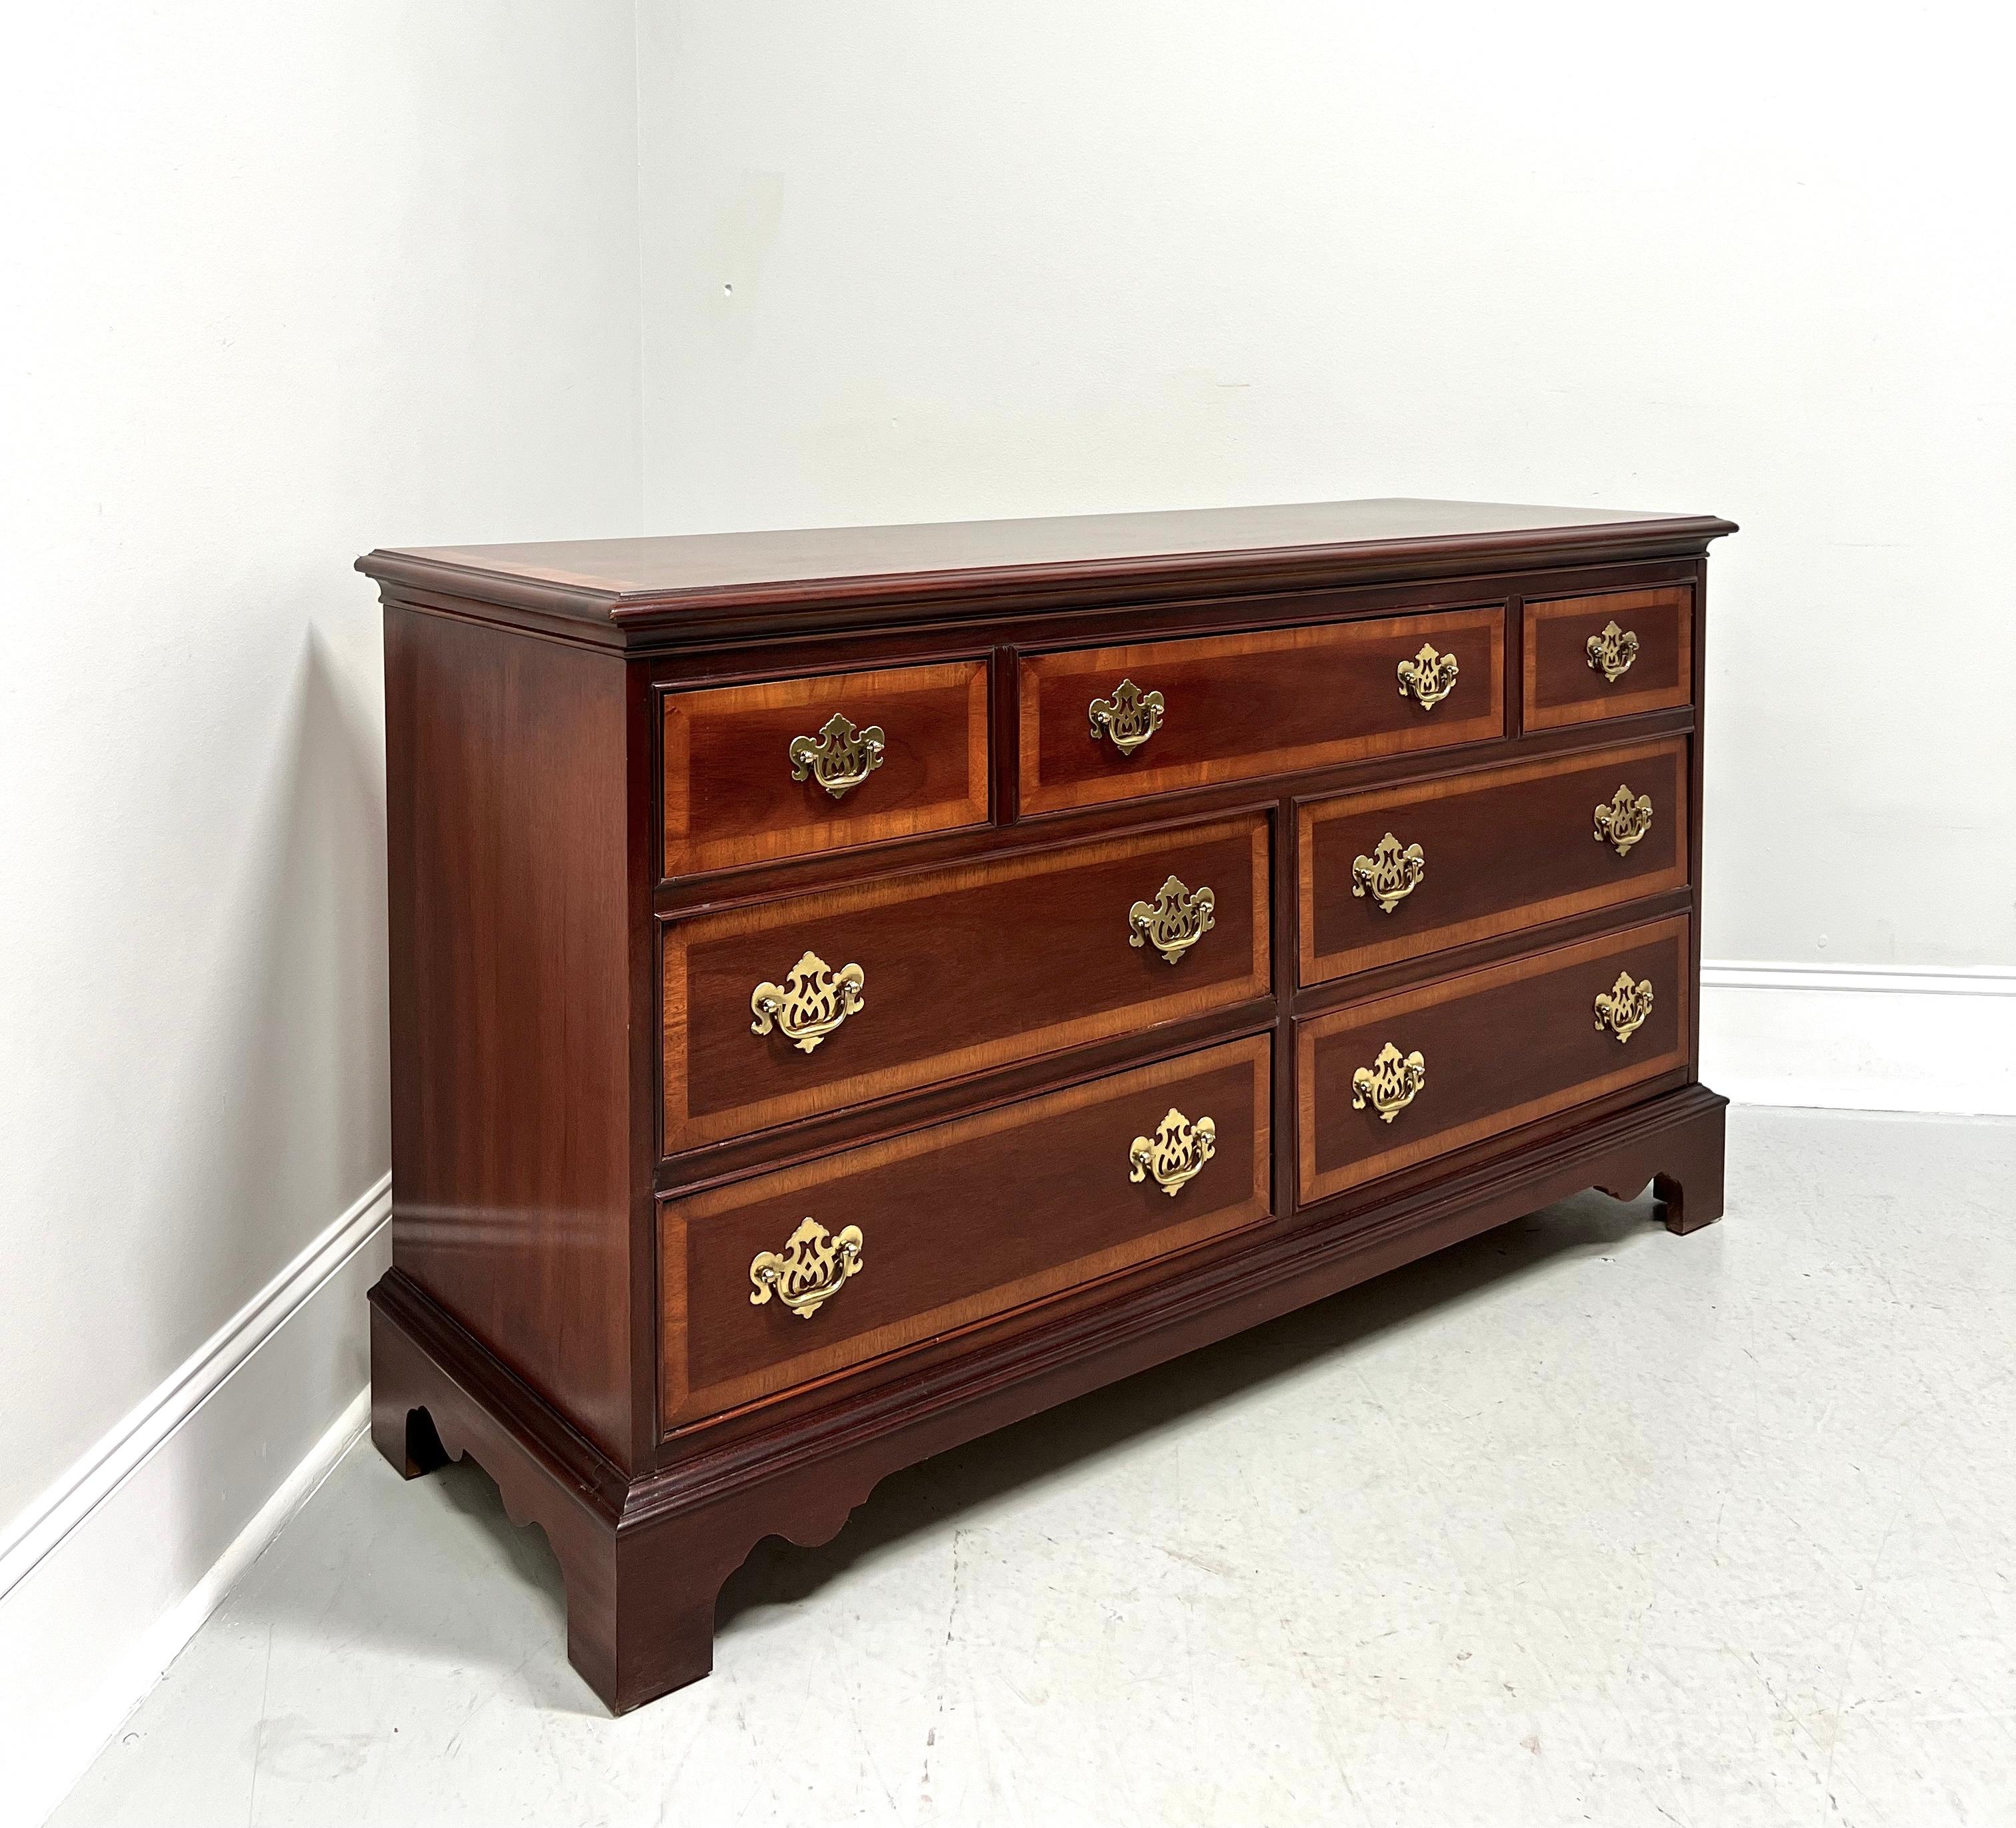 DIXIE Banded Mahogany Chippendale Style Triple Dresser 4